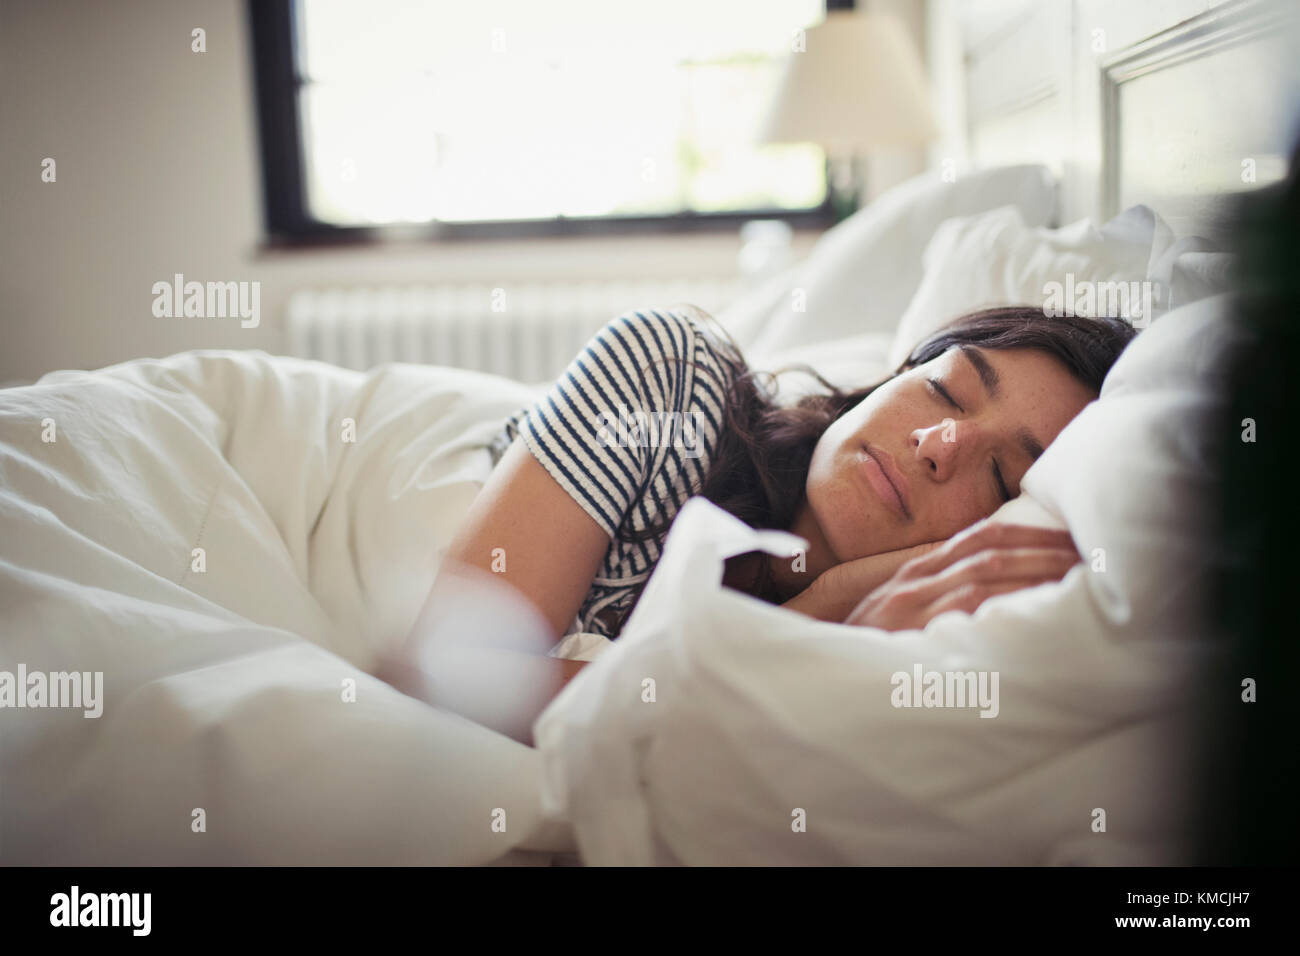 Tired, serene young woman sleeping in bed Stock Photo